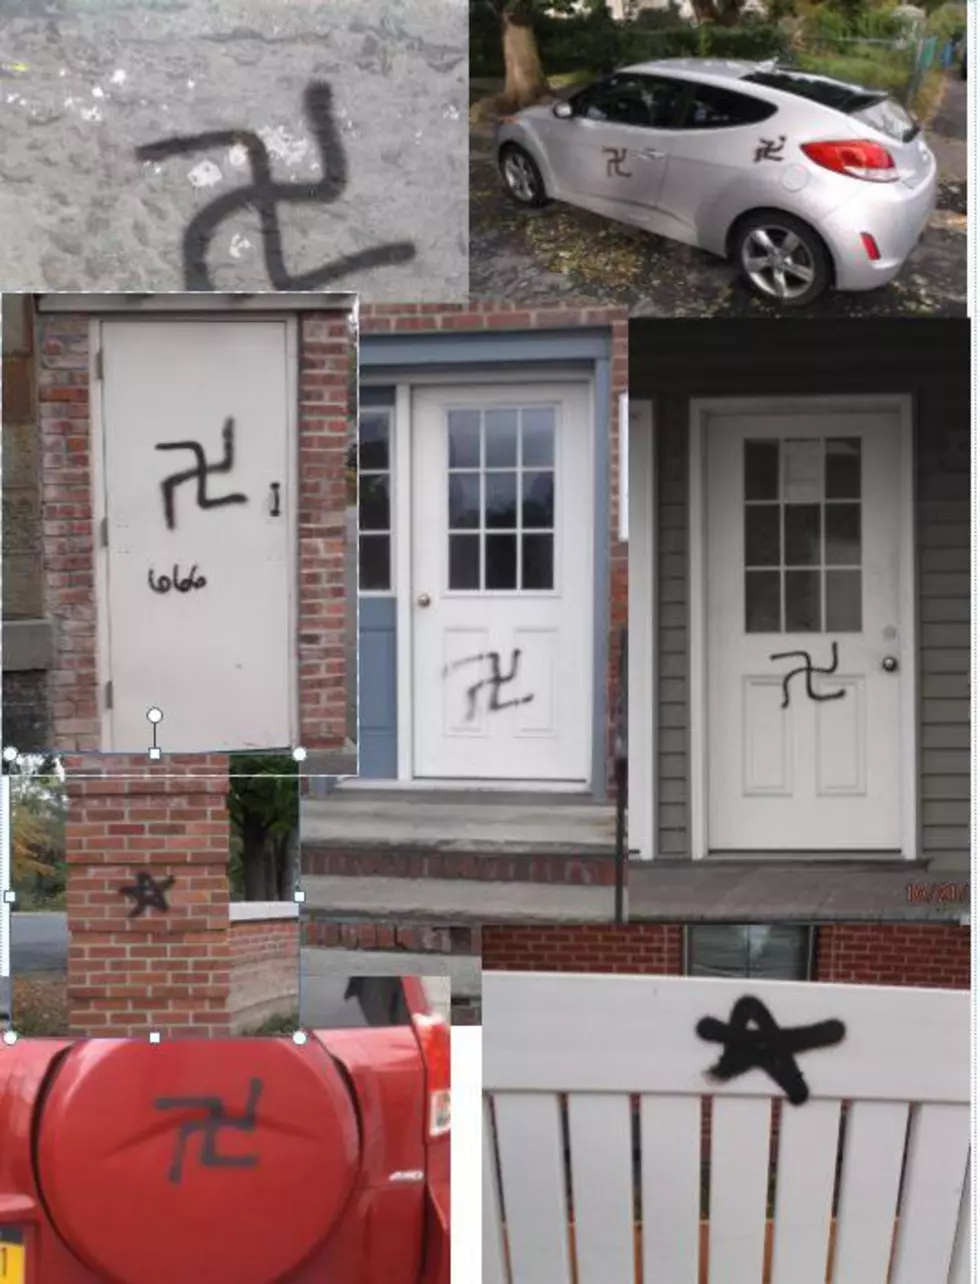 Cops Investigate ‘Ugly Acts’ of Swastikas on Hudson Valley Homes